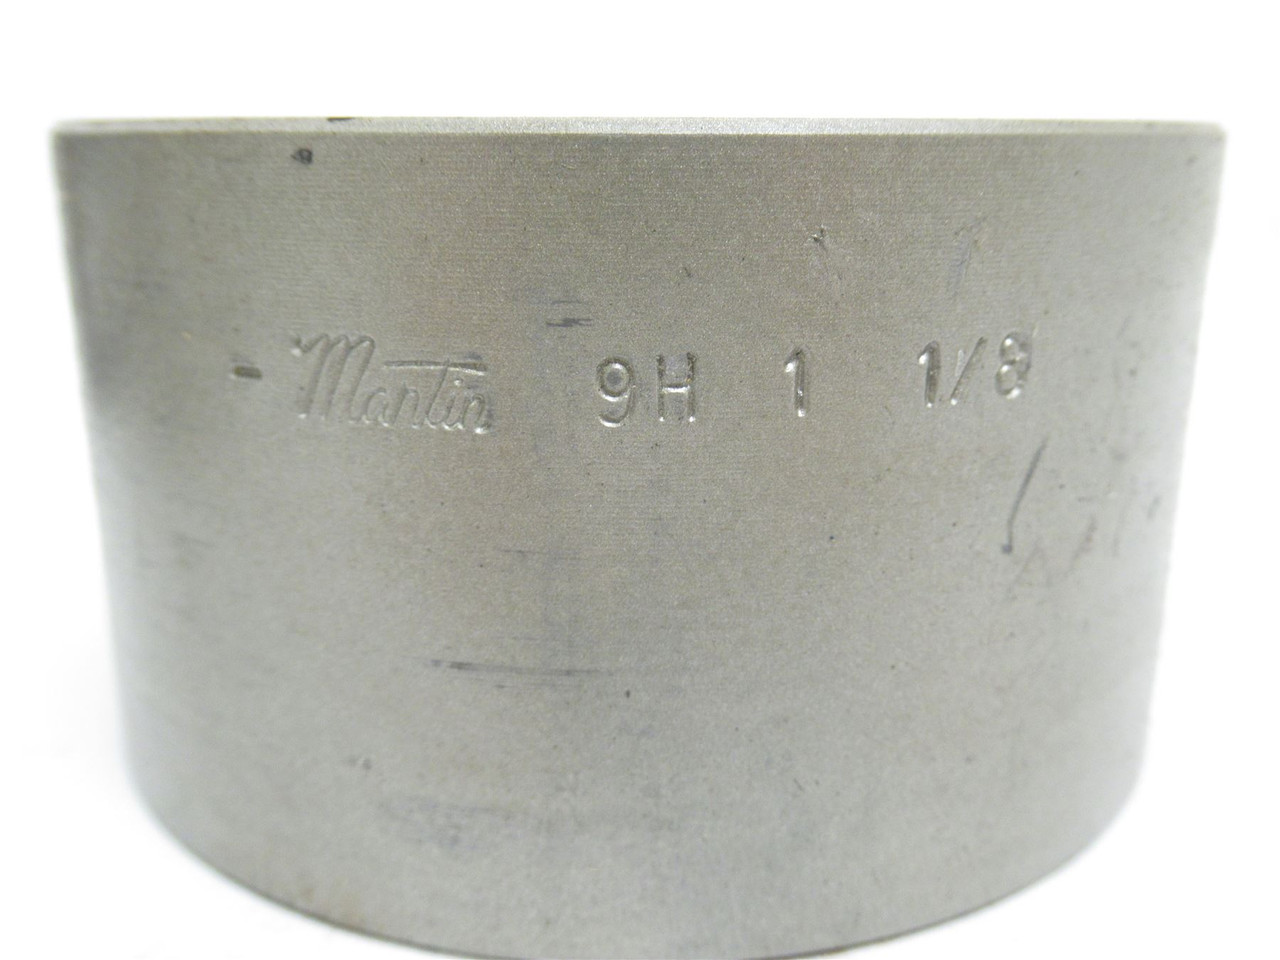 Martin 9H 1 1/8; Sleeve Coupling Flange Size: 9; 1-1/8"ID